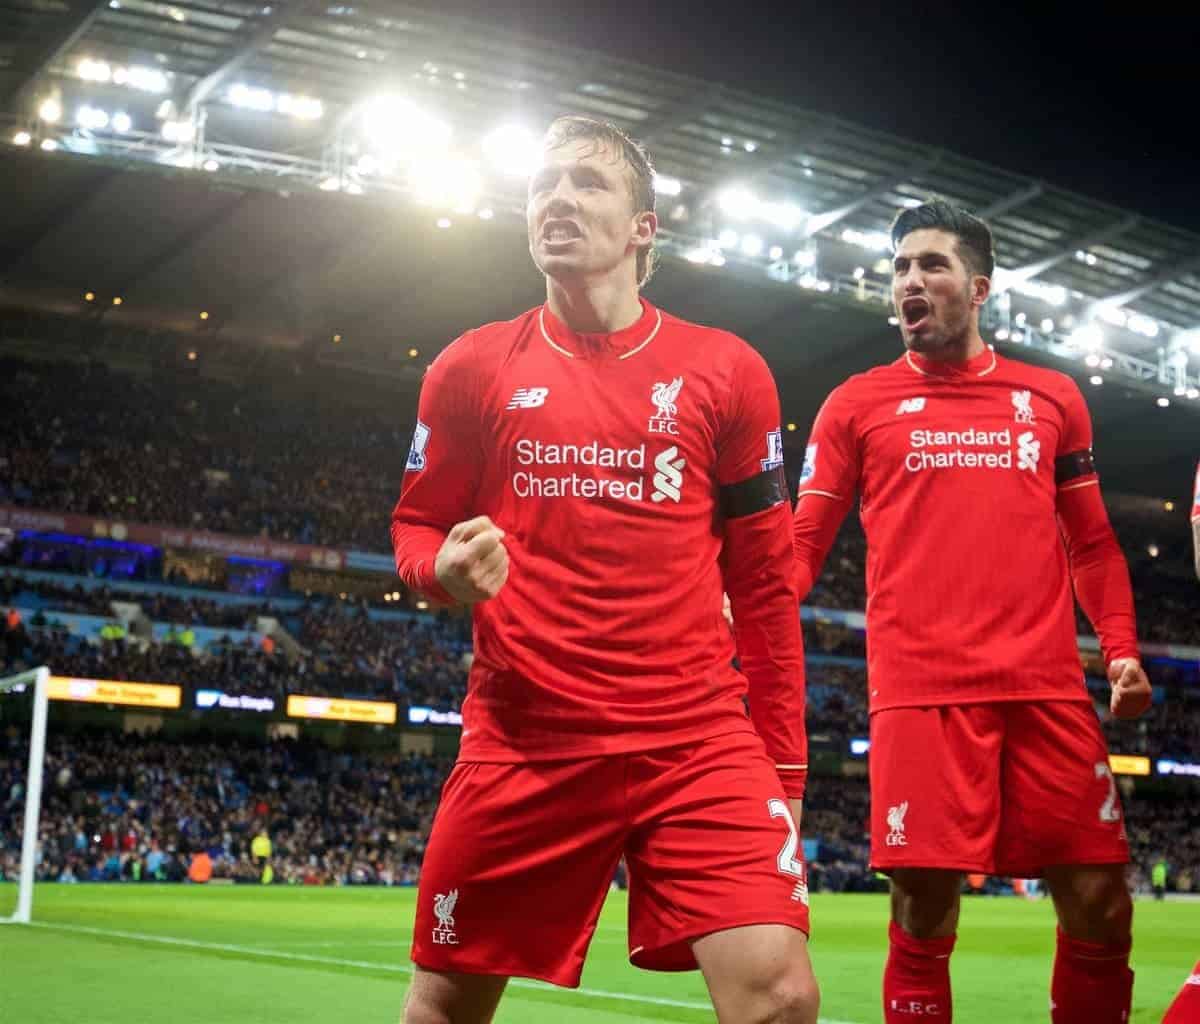 MANCHESTER, ENGLAND - Saturday, November 21, 2015: Liverpool's Lucas Leiva celebrates the the fourth goal against Manchester City, scored by Martin Skrtel, during the Premier League match at the City of Manchester Stadium. (Pic by David Rawcliffe/Propaganda)